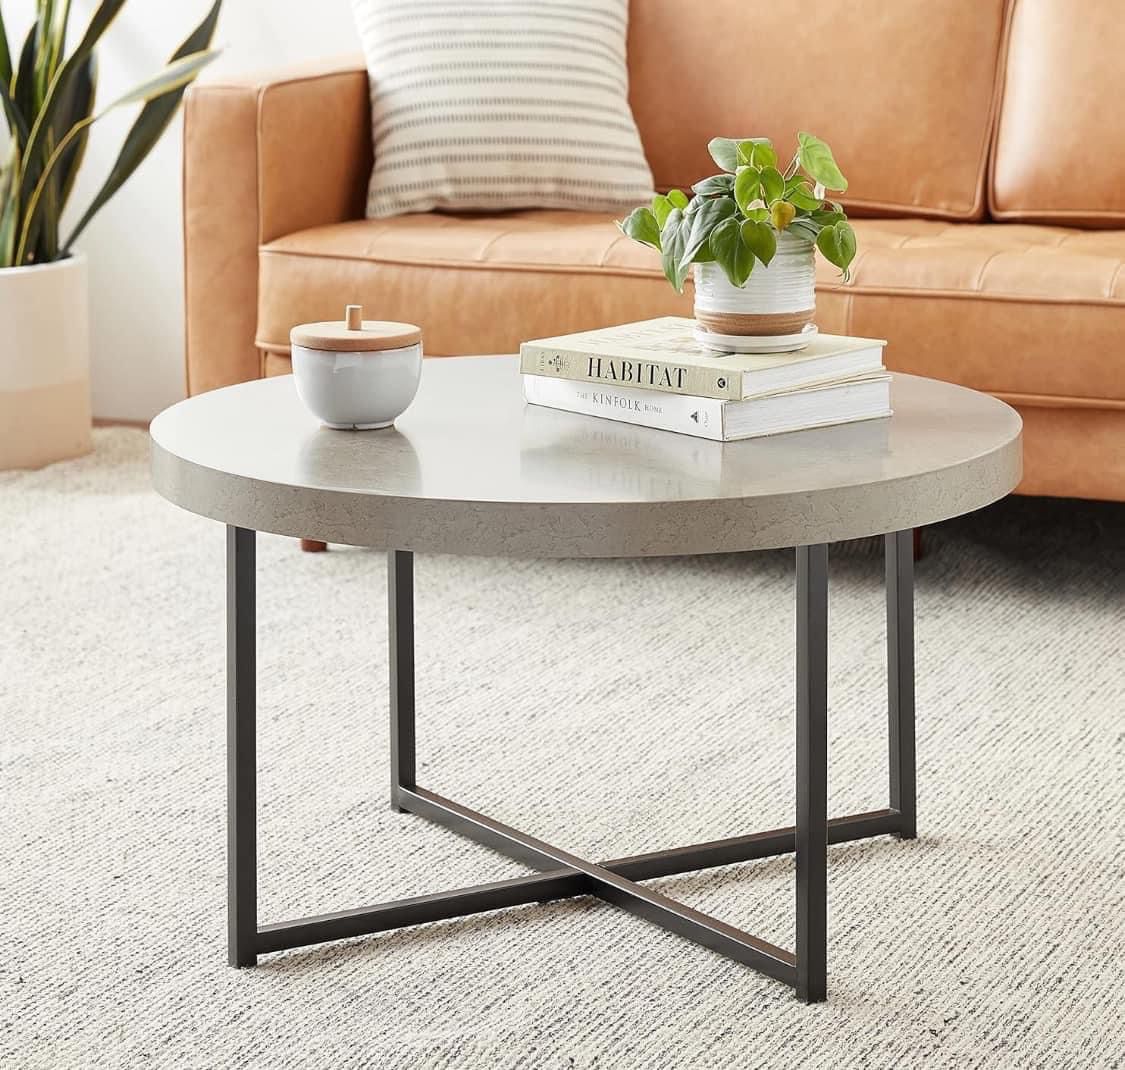 New Concrete Inspired Minimalist Coffee Table